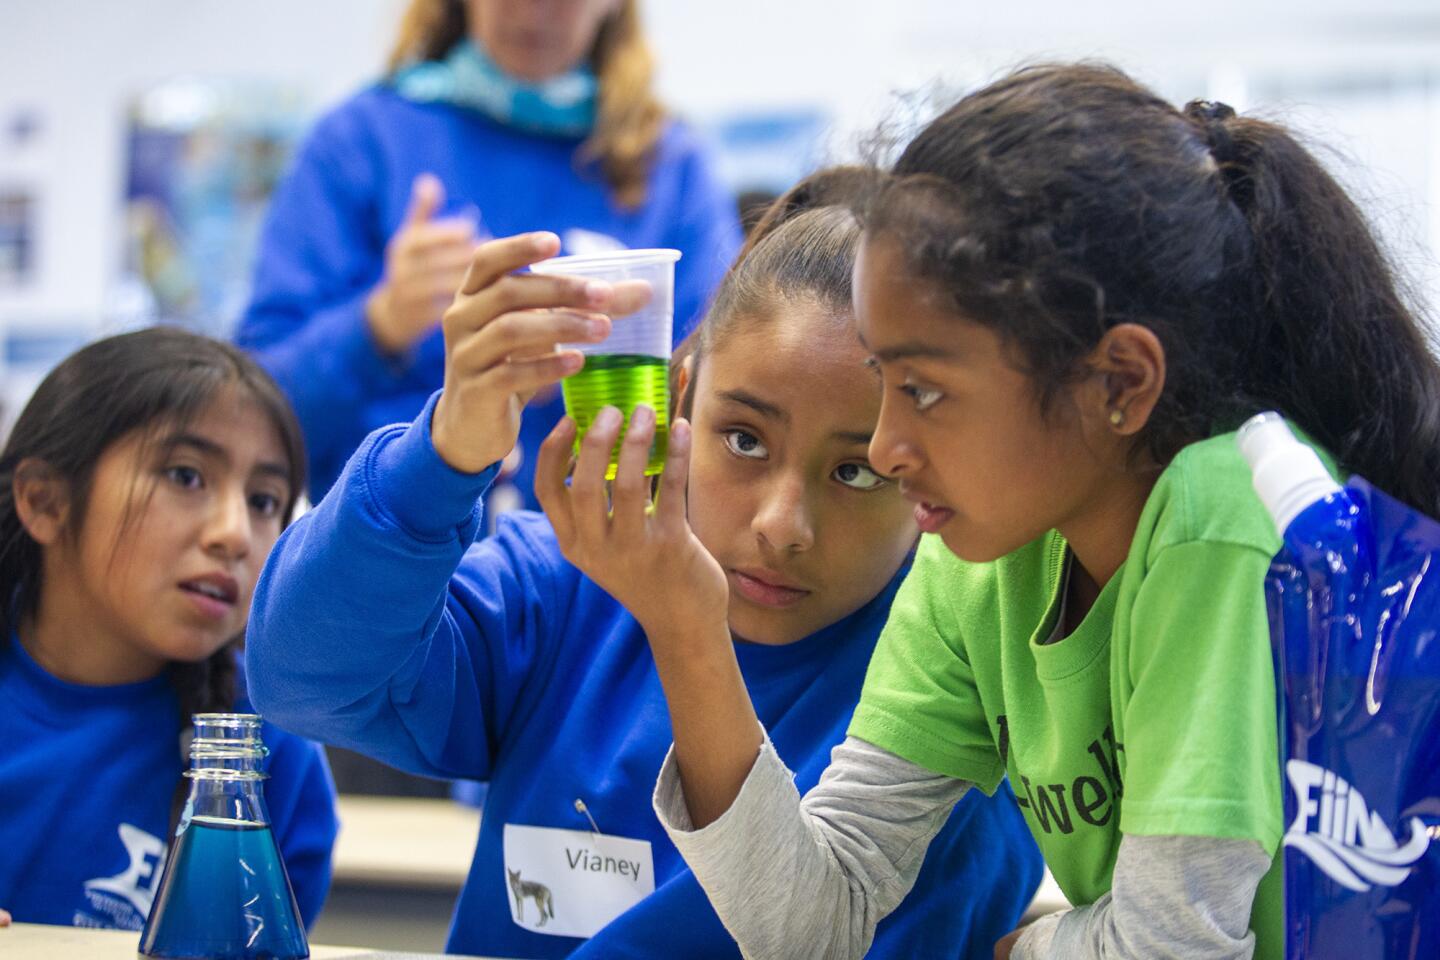 Valeria Pedraza, 11, left, Vianey Olivier, 10, and Kiara Padilla, 10, watch a beaker for a reaction after mixing salt water and fresh water during the FiiN (Fostering interest in Nature) program at the Back Bay Science Center in Newport Beach on Tuesday.